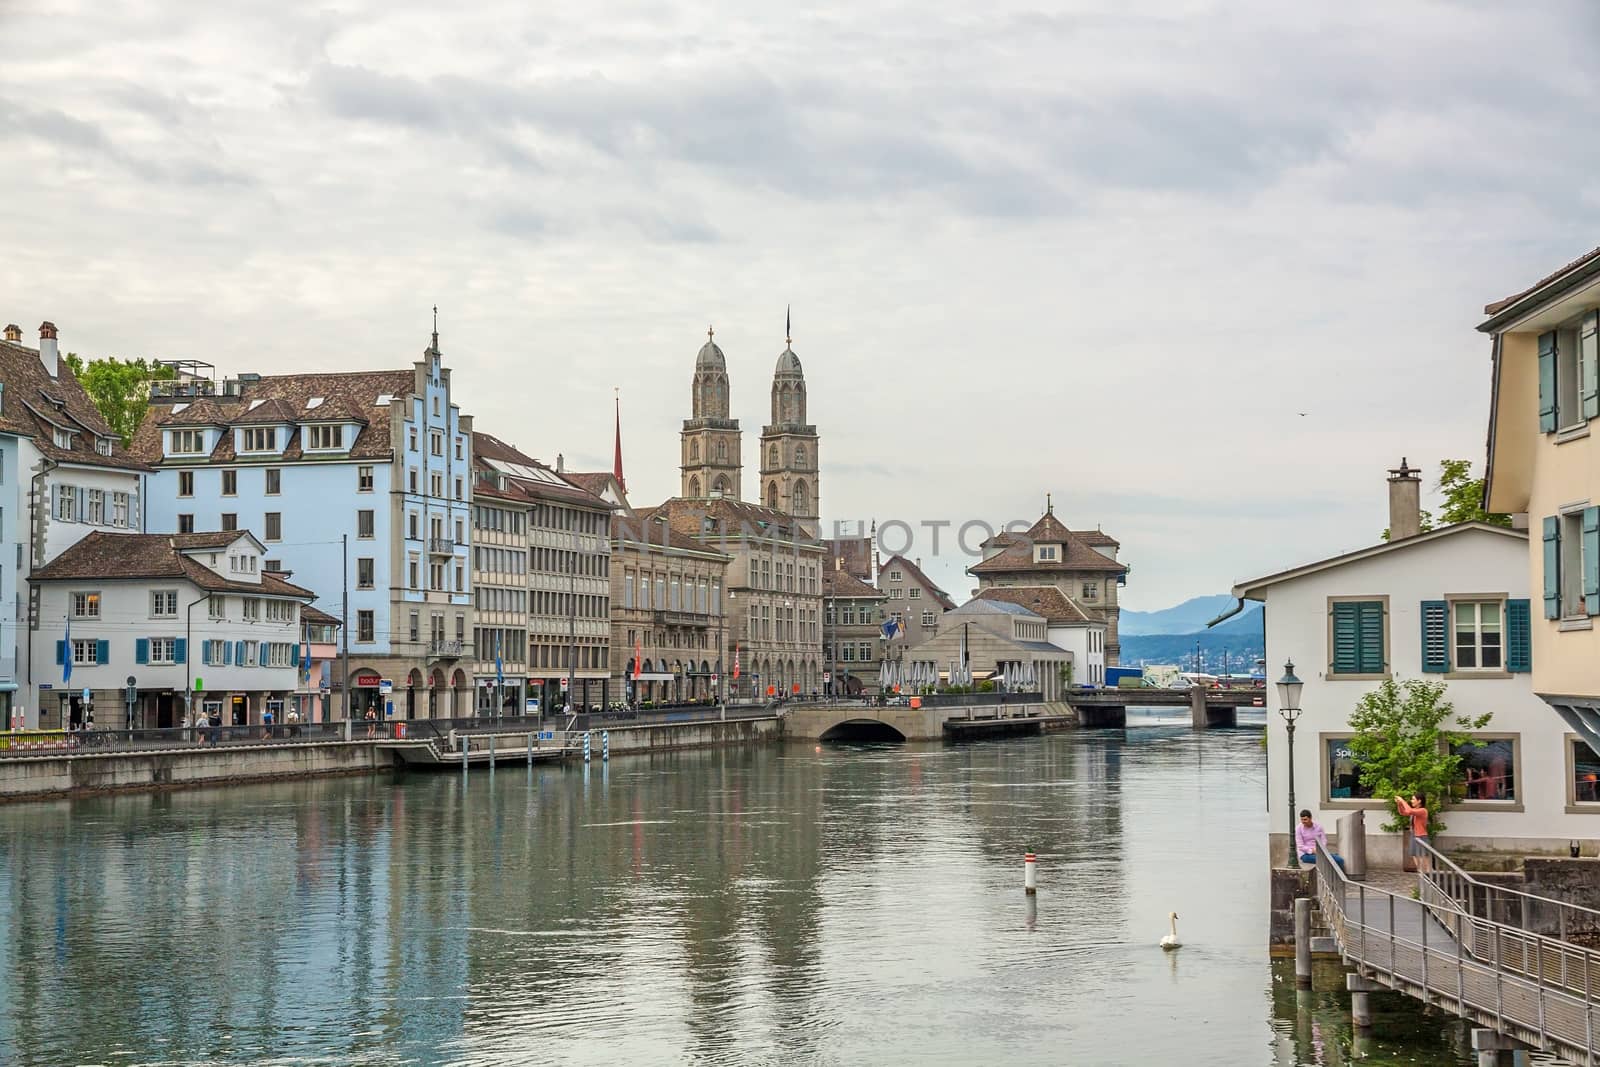 Downtown Zurich, Limmatquai with Grossmunster and town hall by aldorado